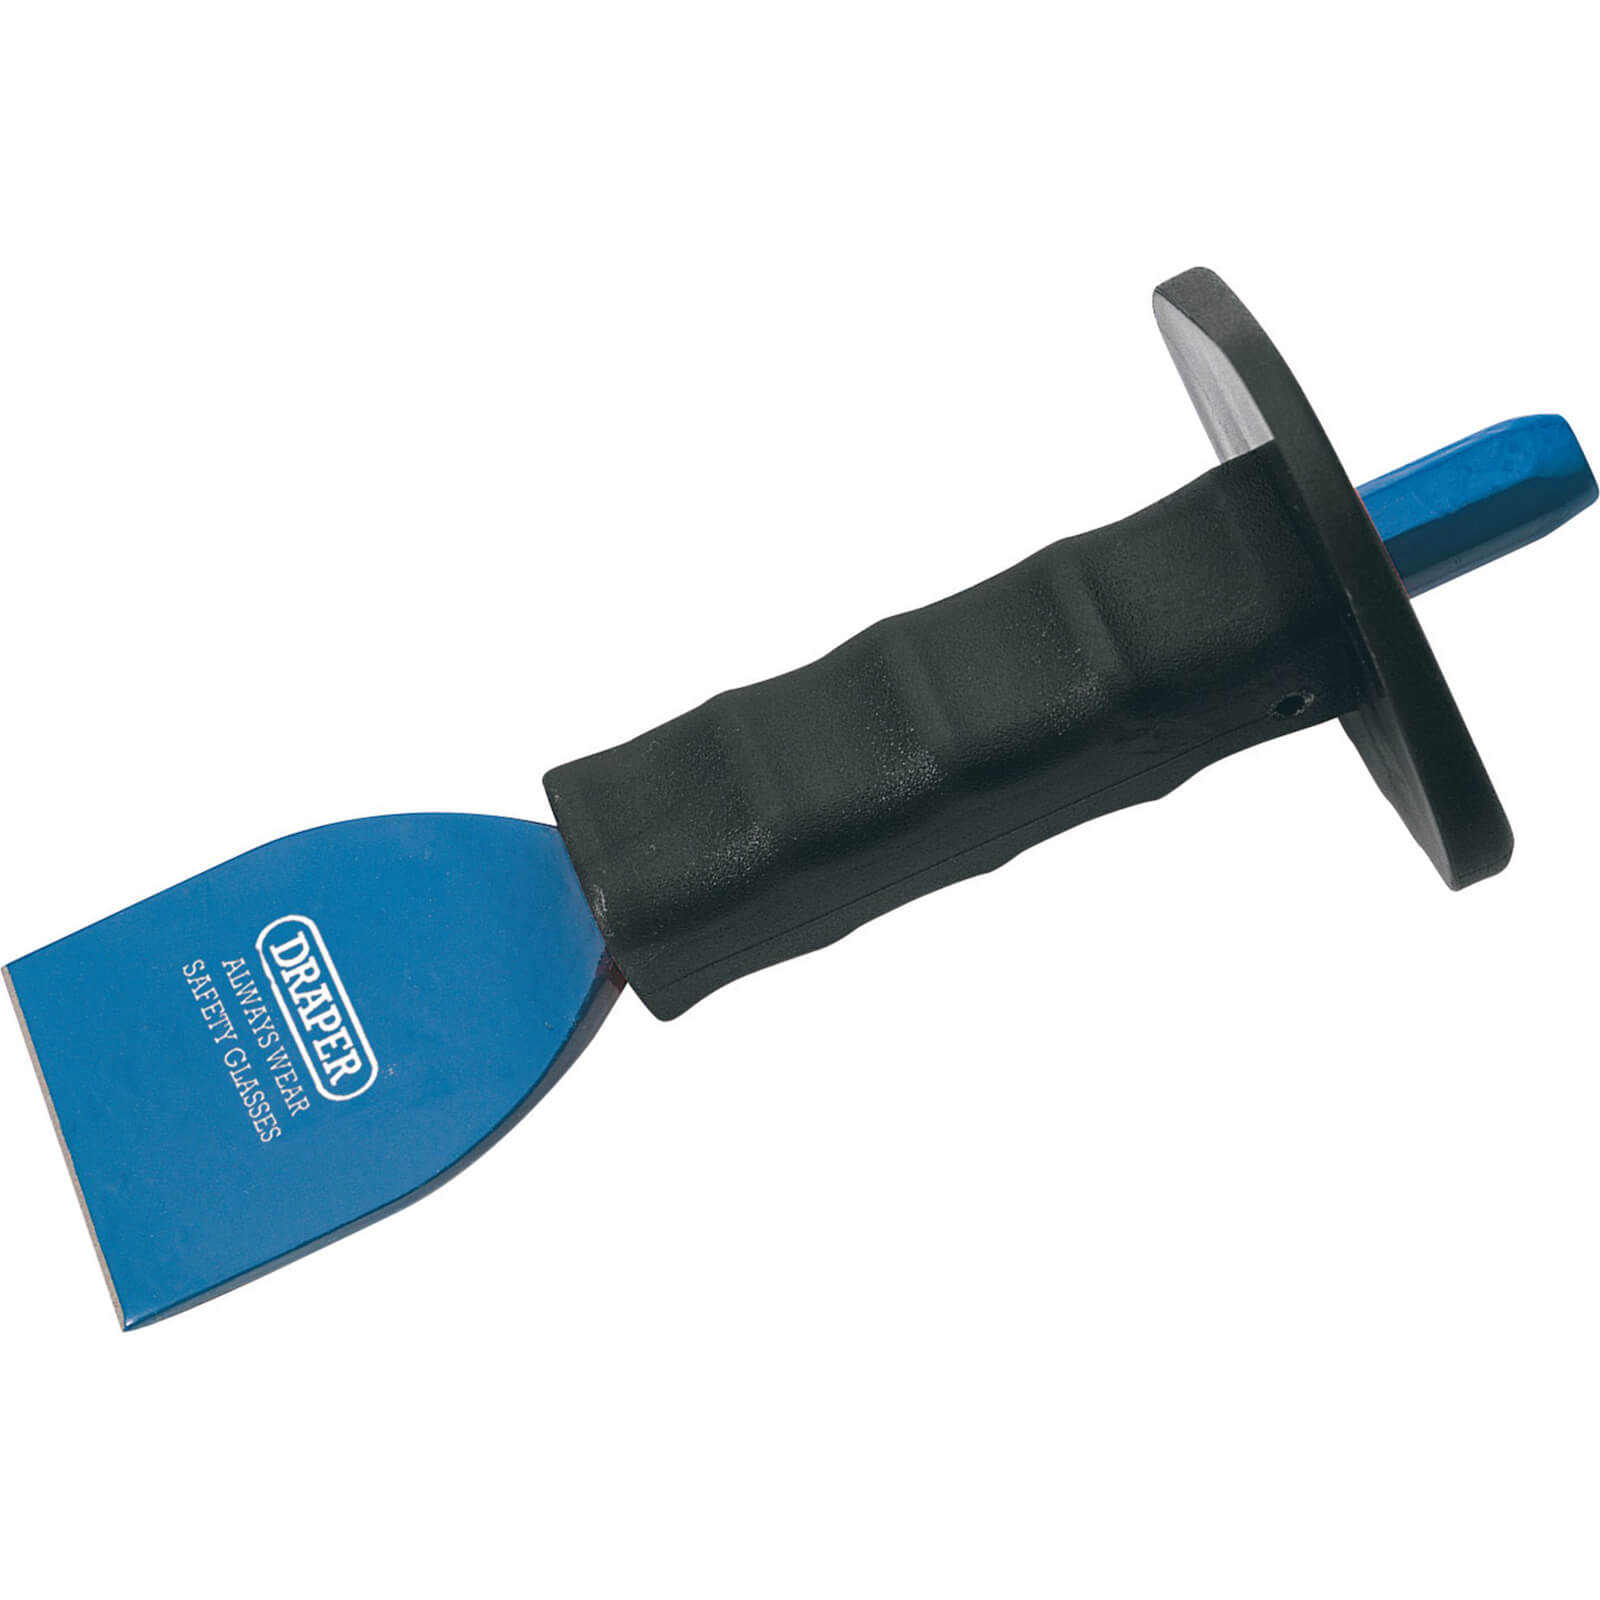 Image of Draper Electricians Bolster Chisel and Hand Guard 60mm